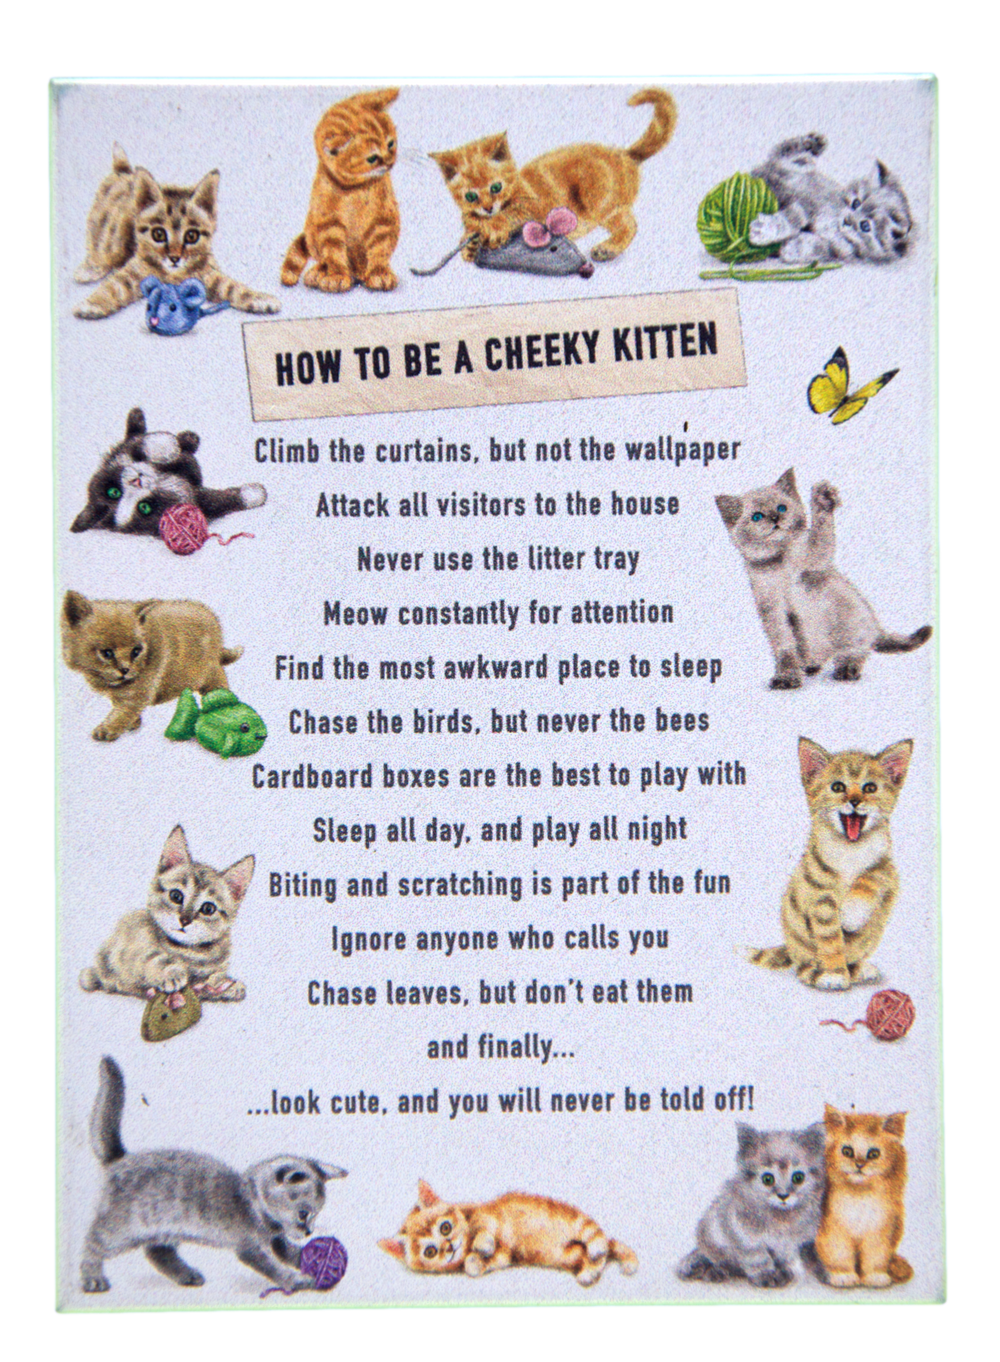 How to be a Cheeky Kitten Metal Hanging Cat Sign and Matching Fridge Magnet